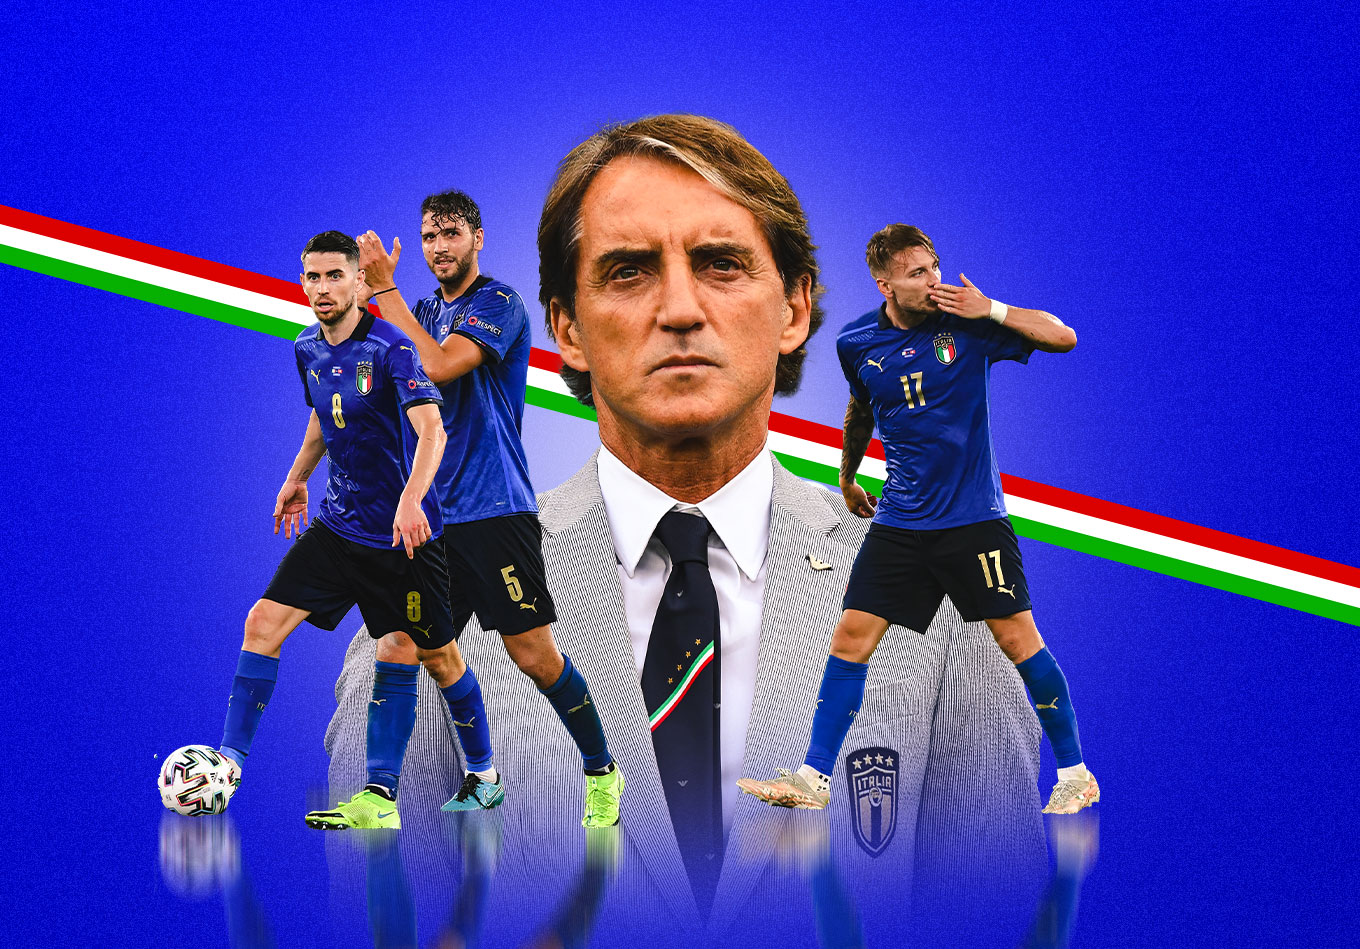 The Mancini Machine: Can Unbeaten Italy Go All the Way at Euro 2020?